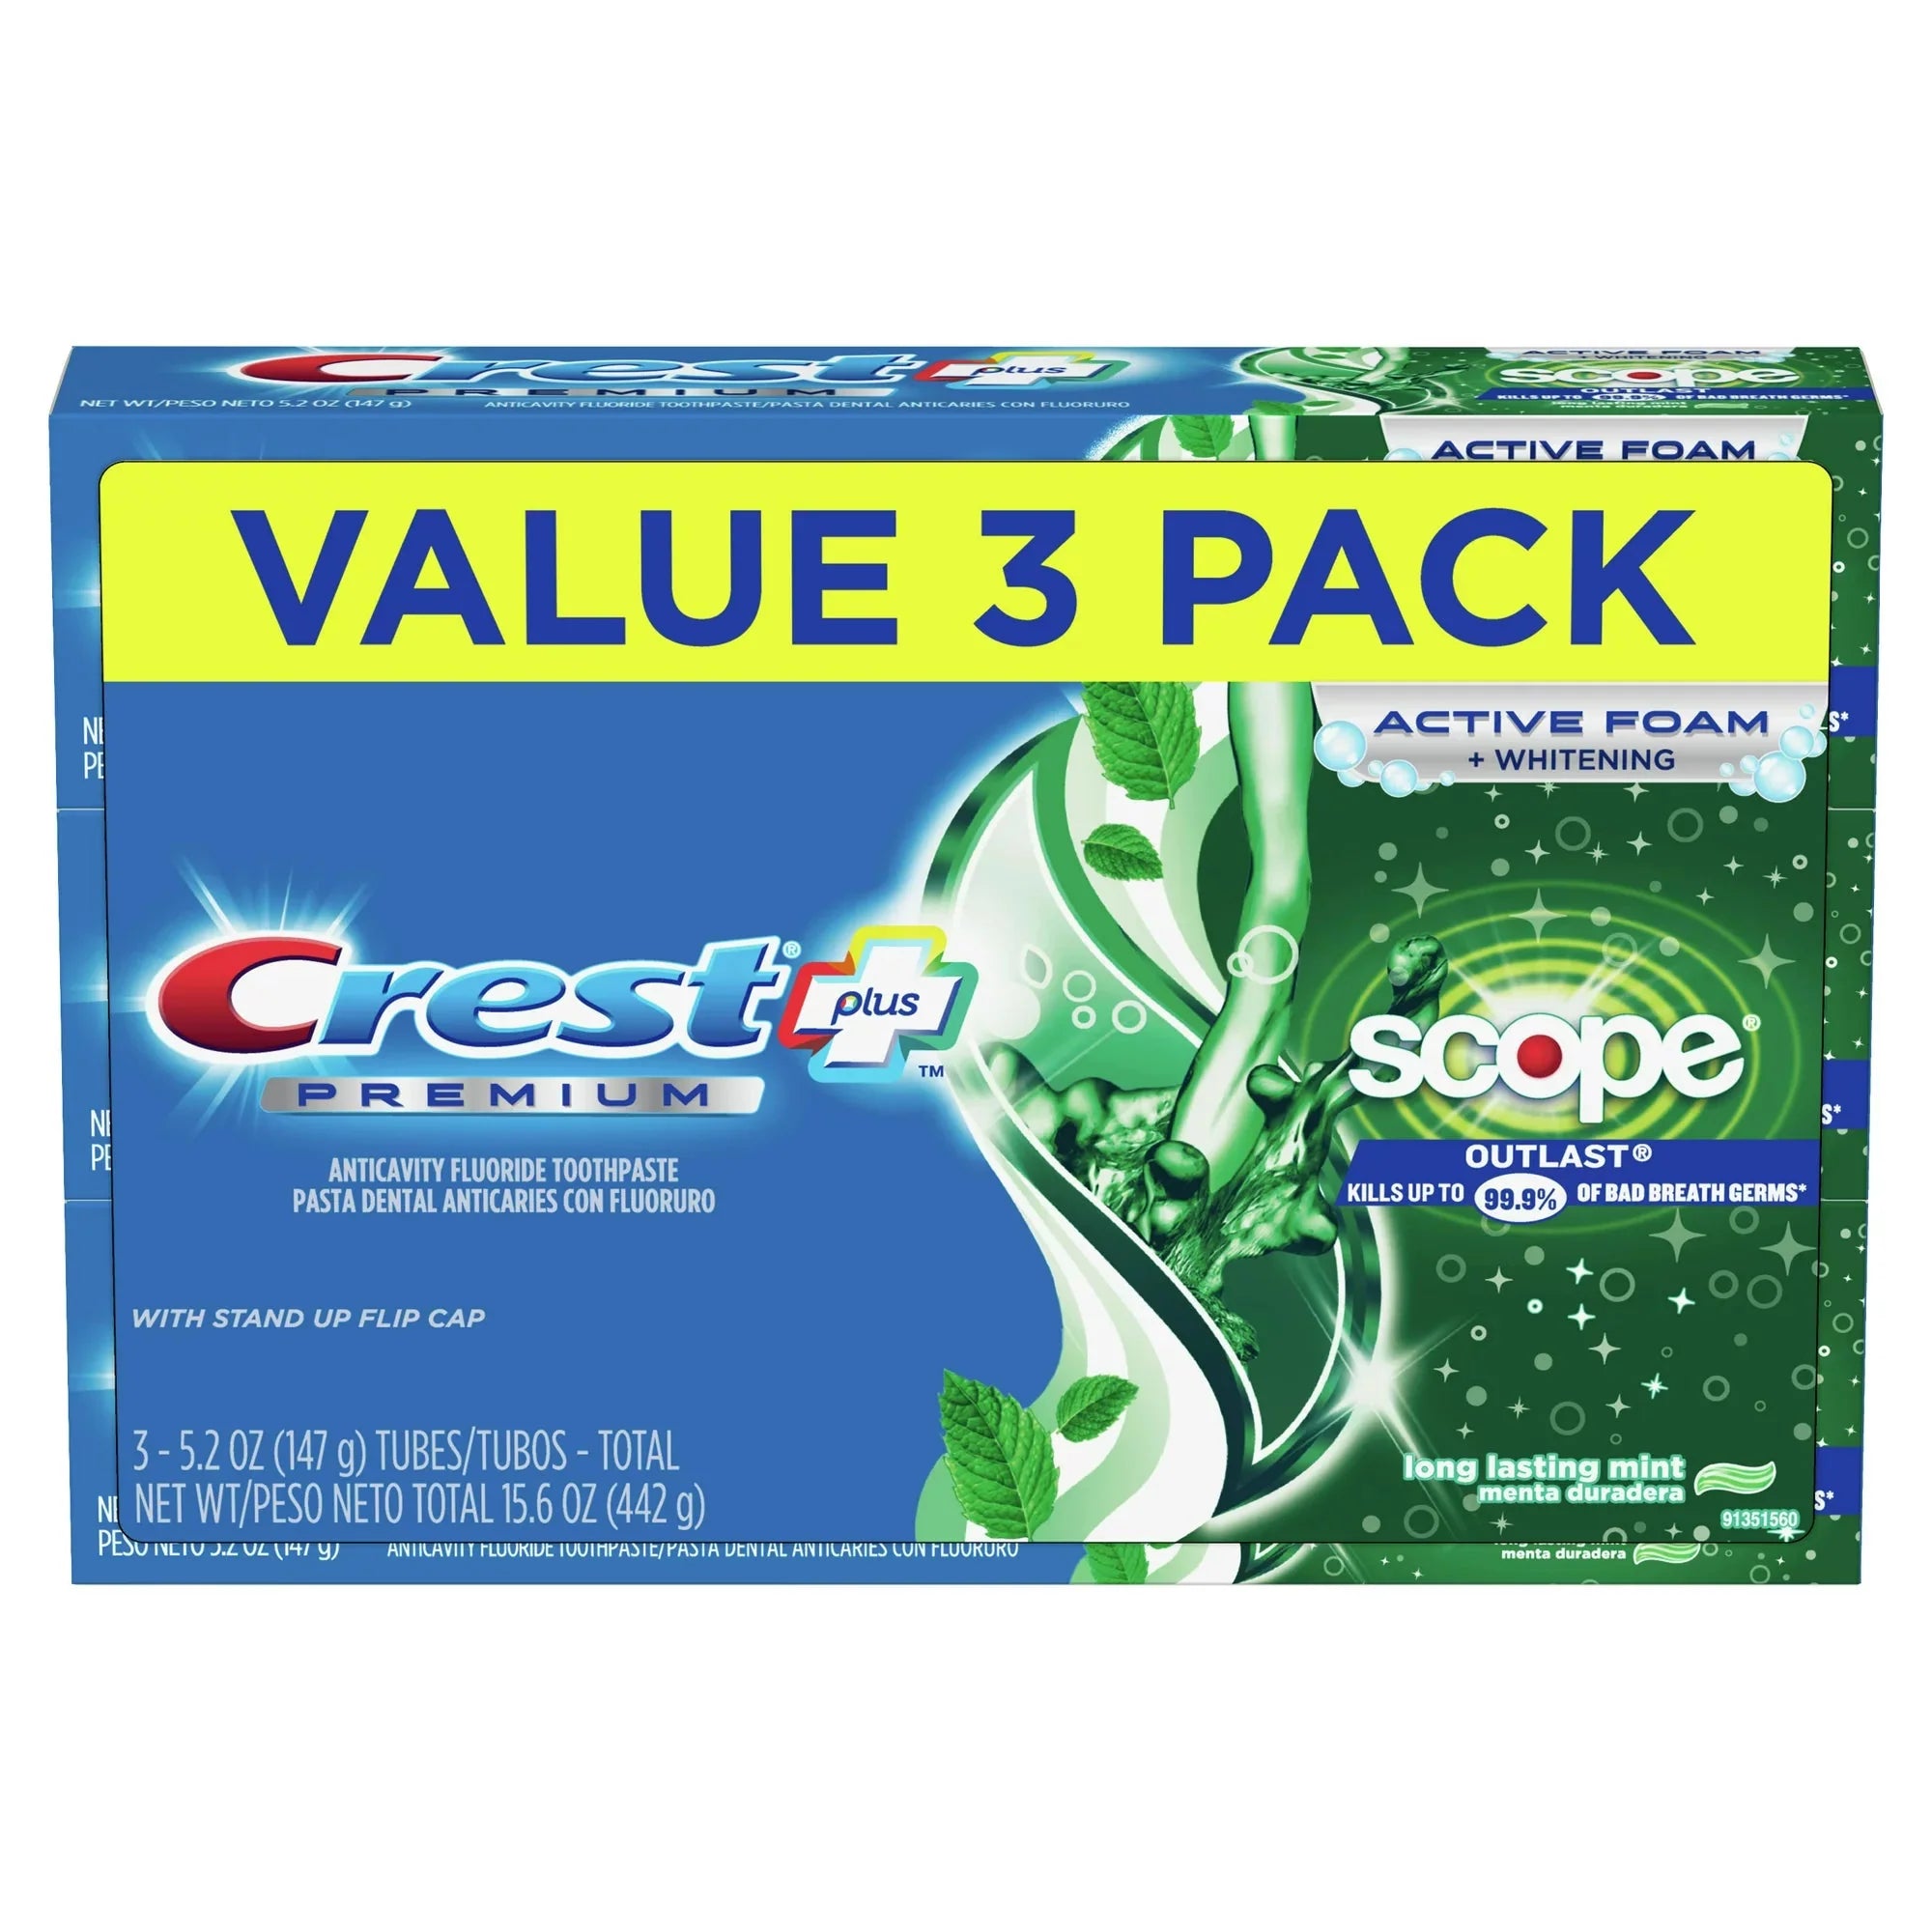 Wholesale prices with free shipping all over United States Crest Premium Plus Scope Outlast Toothpaste, Long Lasting Mint Flavor 5.2 oz, Pack of 3 - Steven Deals